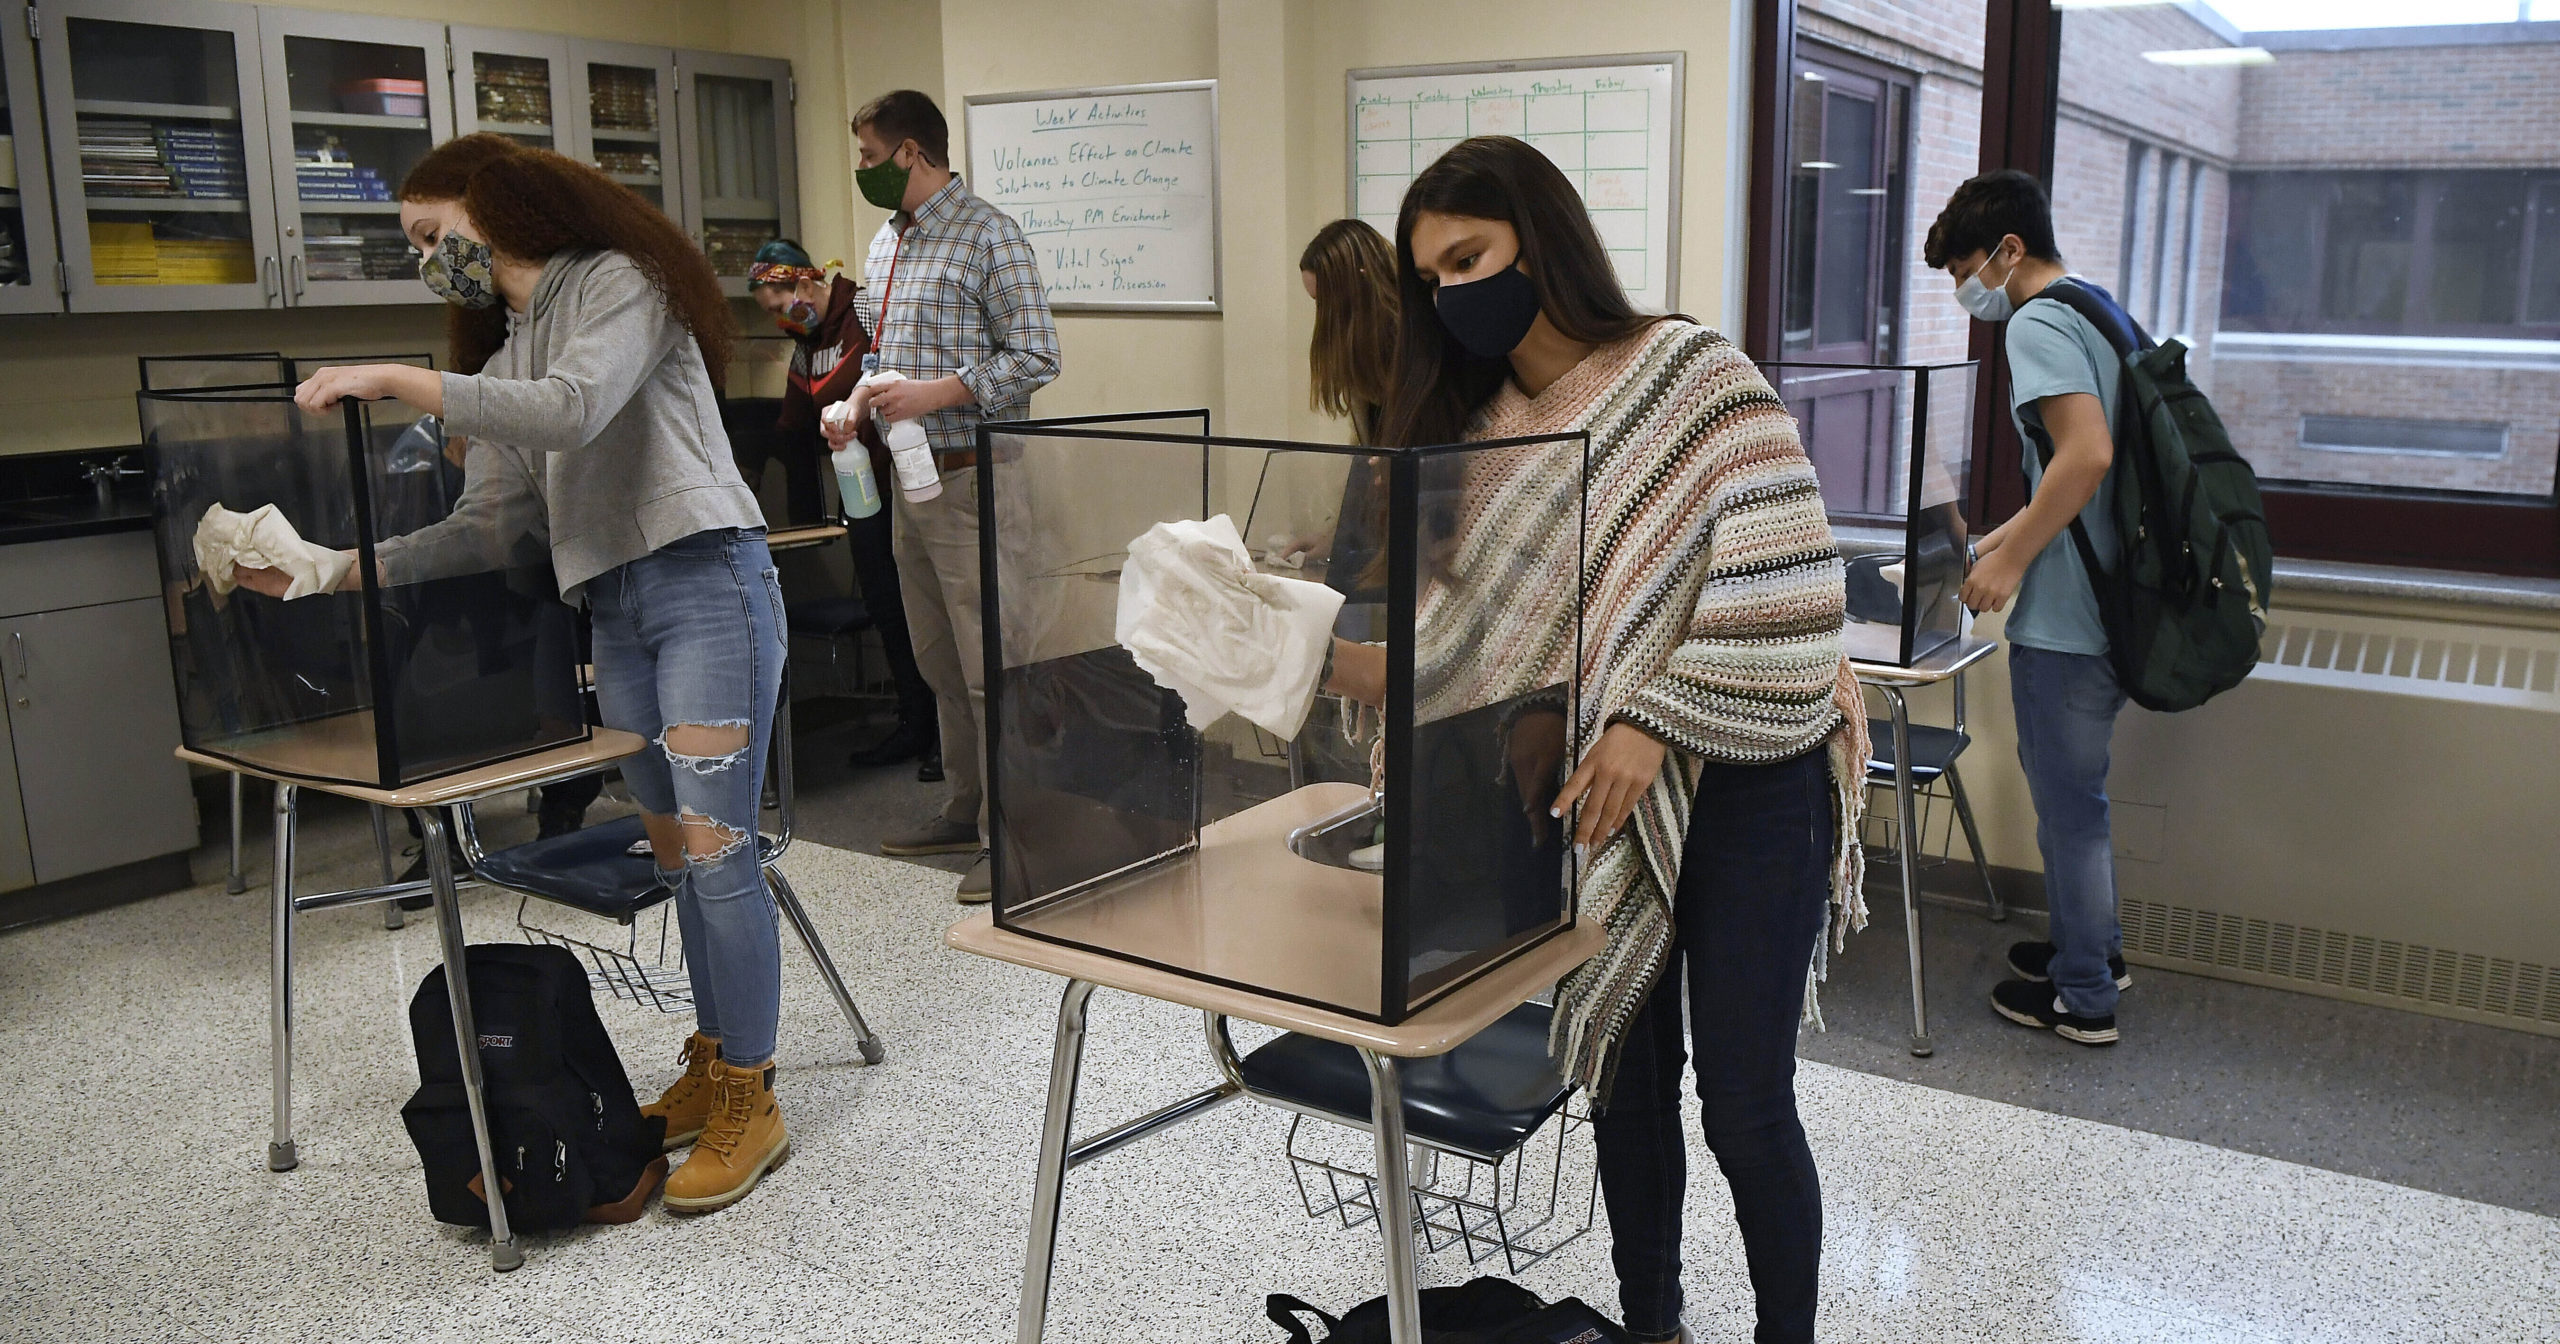 Students clean their work areas at the end of class at Windsor Locks High School in Windsor Locks, Connecticut, on March 18, 2021.